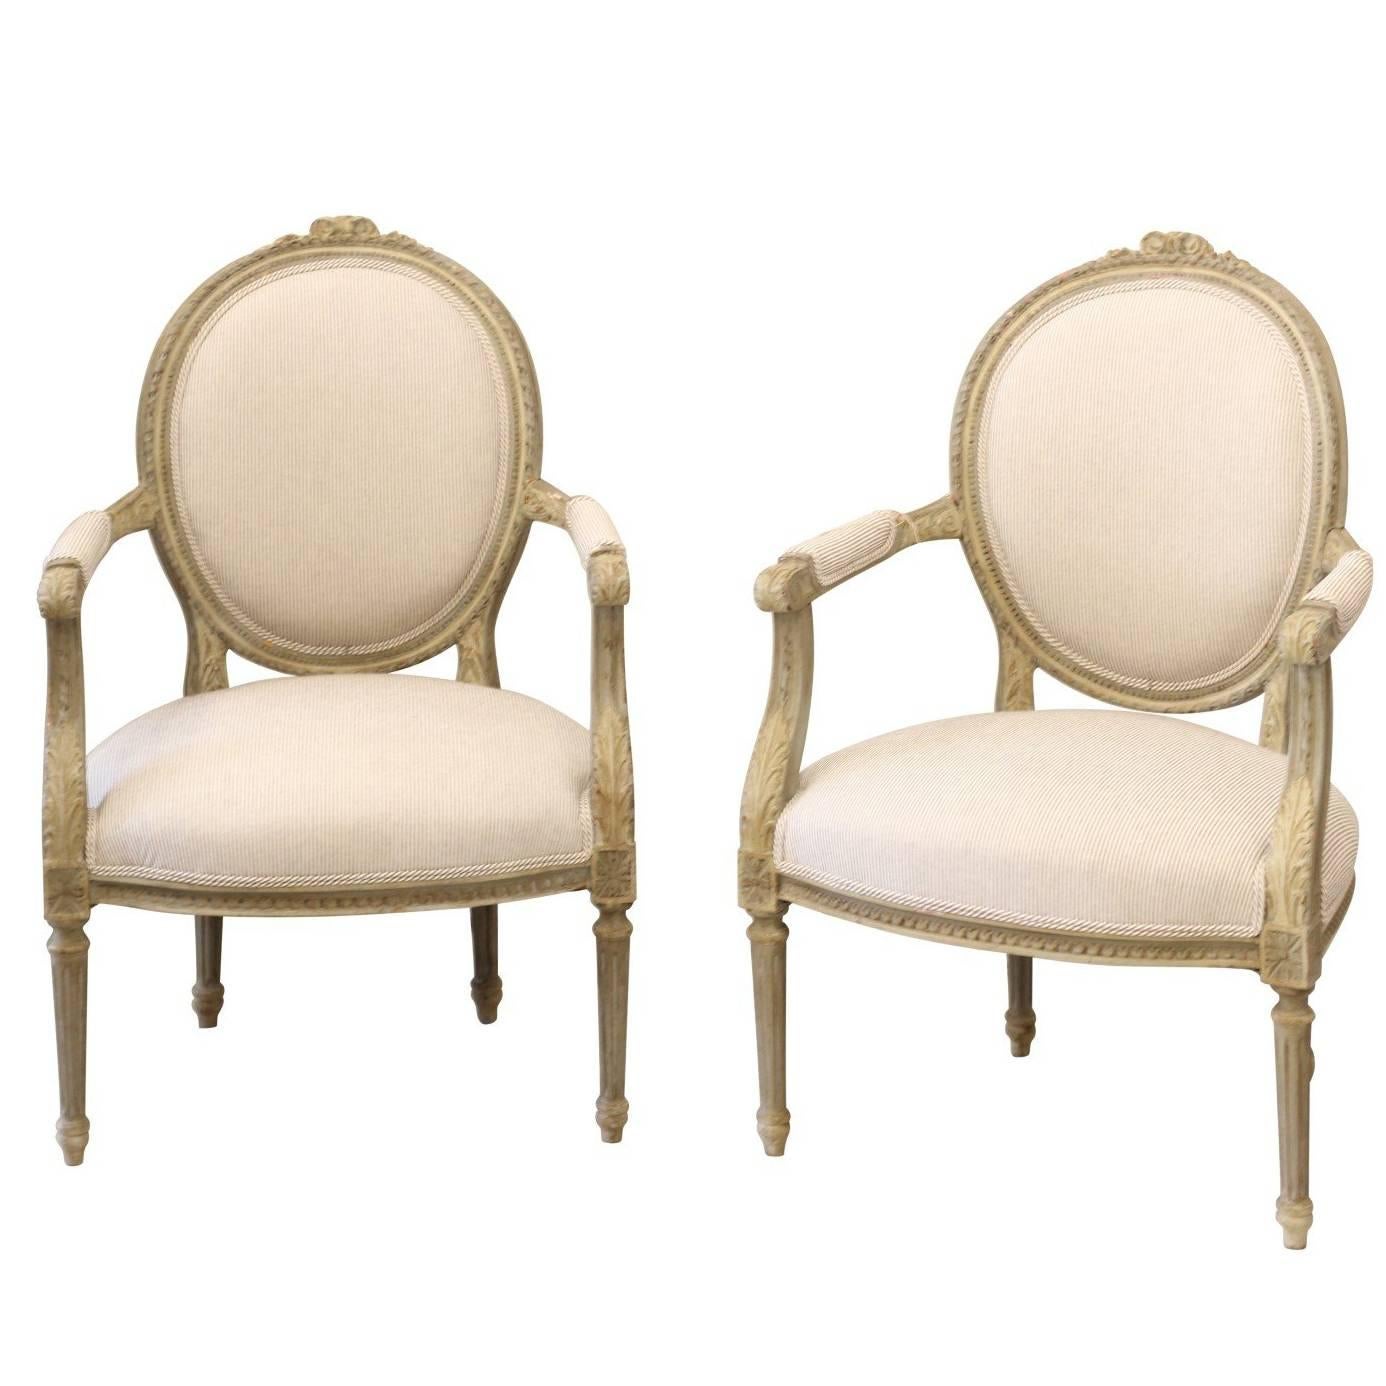 Pair of 1880s French Louis XVI Style Oval Back Painted and Carved Armchairs